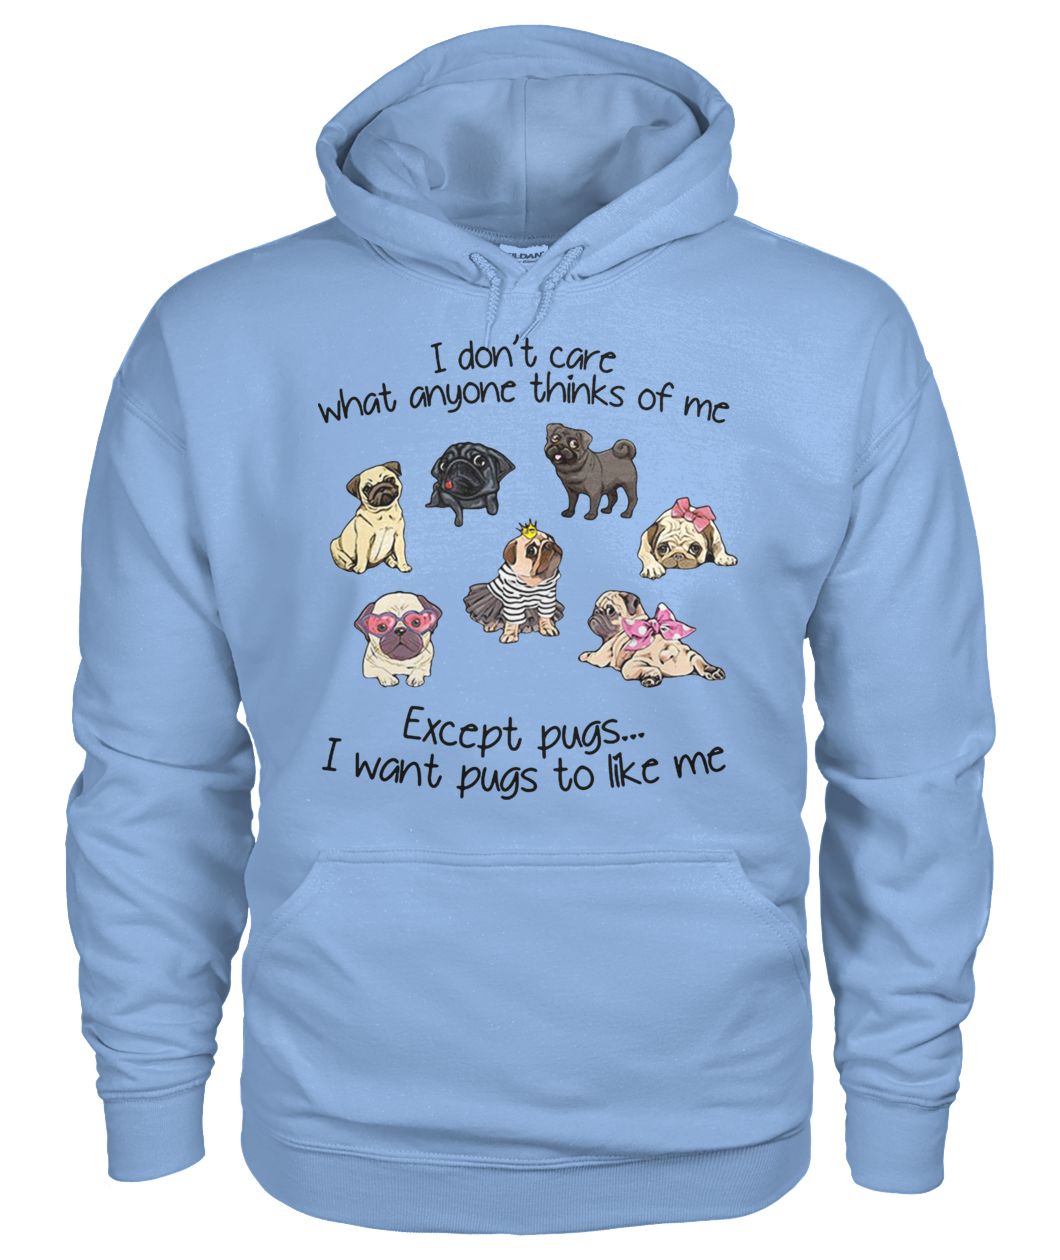 I don't care what anyone thinks of me excepts pugs I want pugs to like me gildan hoodie